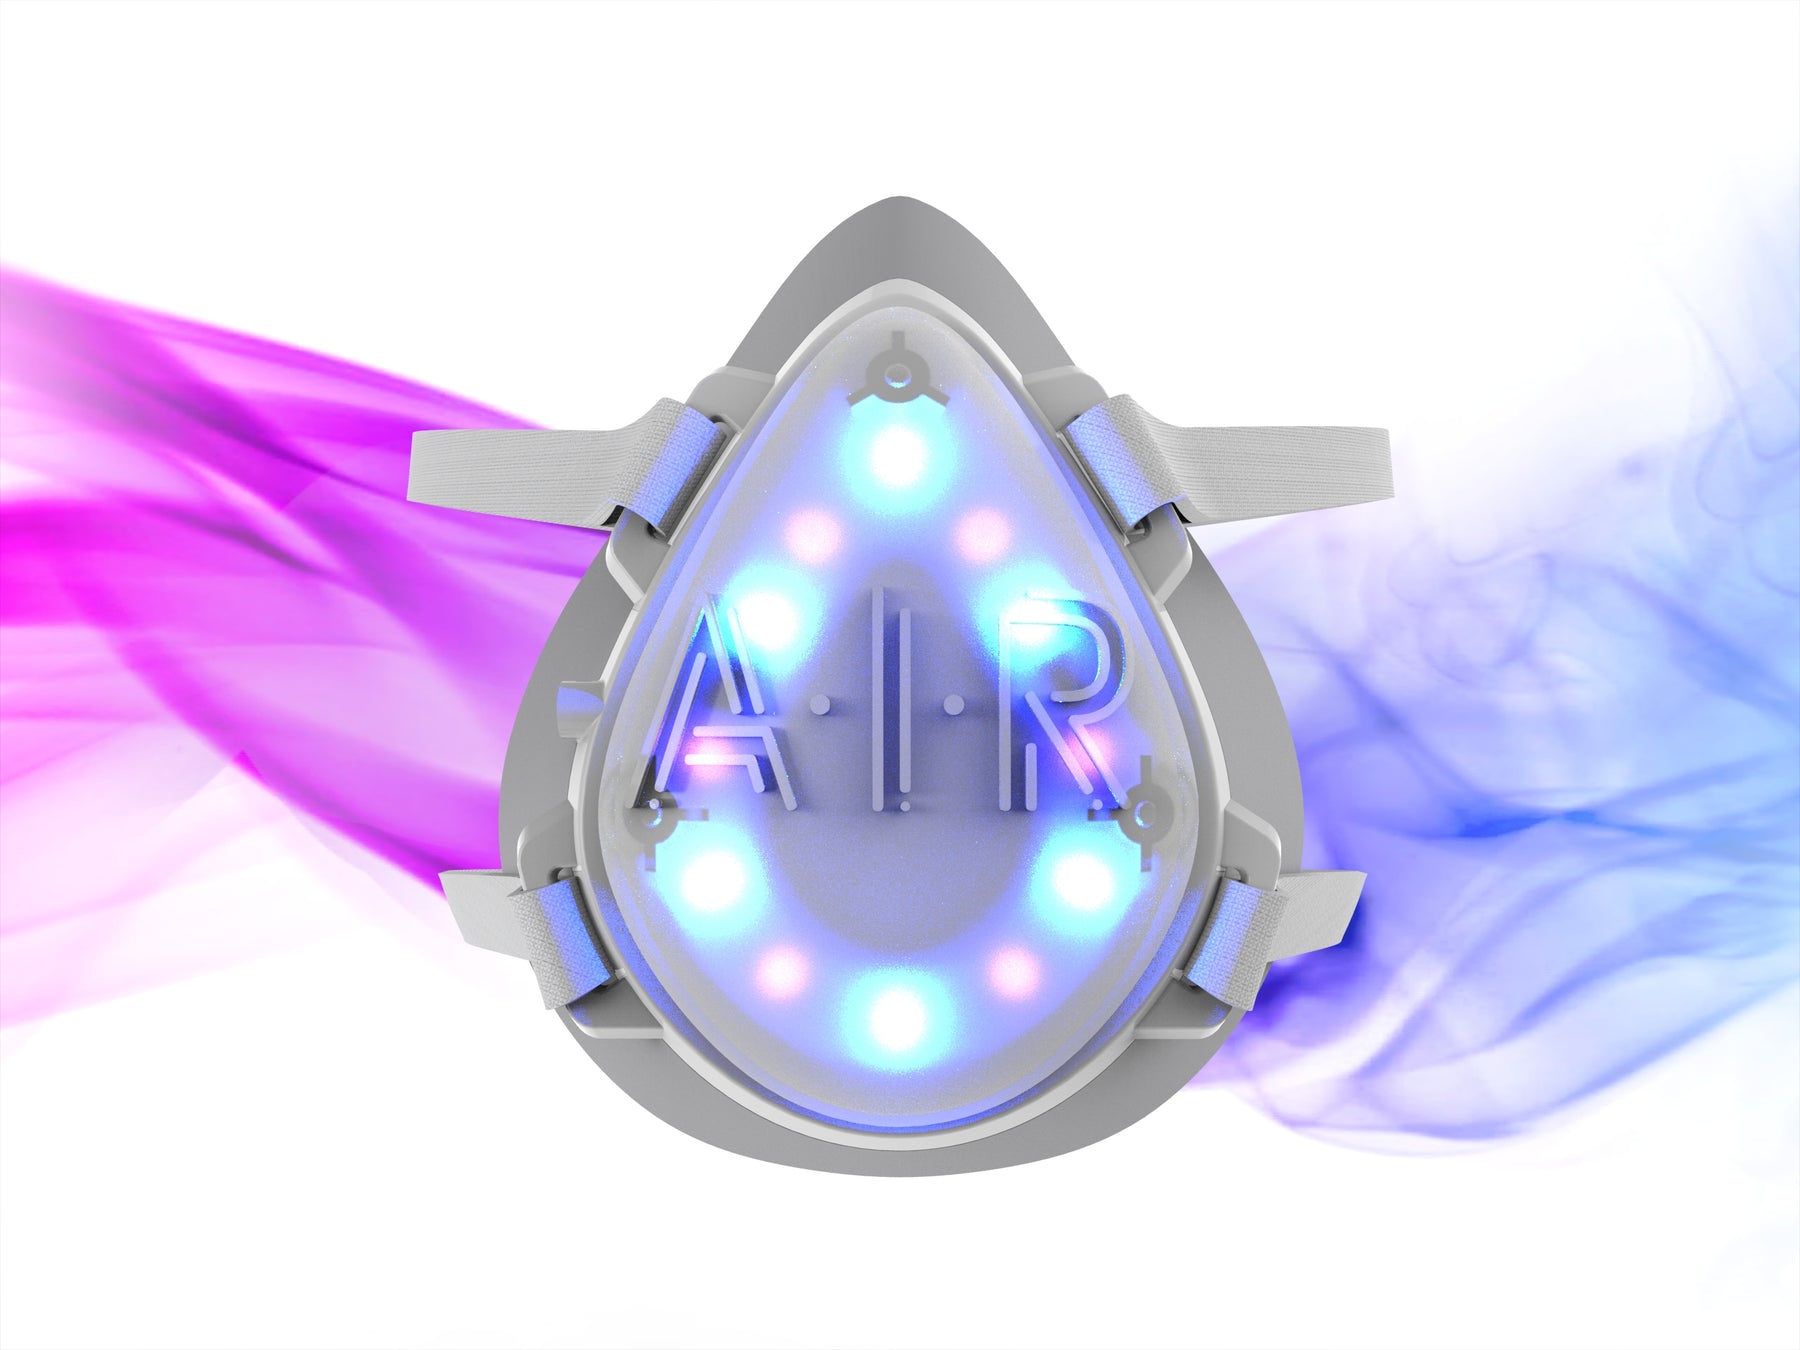 The Latest Weapon in the COVID-19 Battle - The A.I.R. Solo™ Virus Killing UV-Light Face Mask – Is Now Available For Order